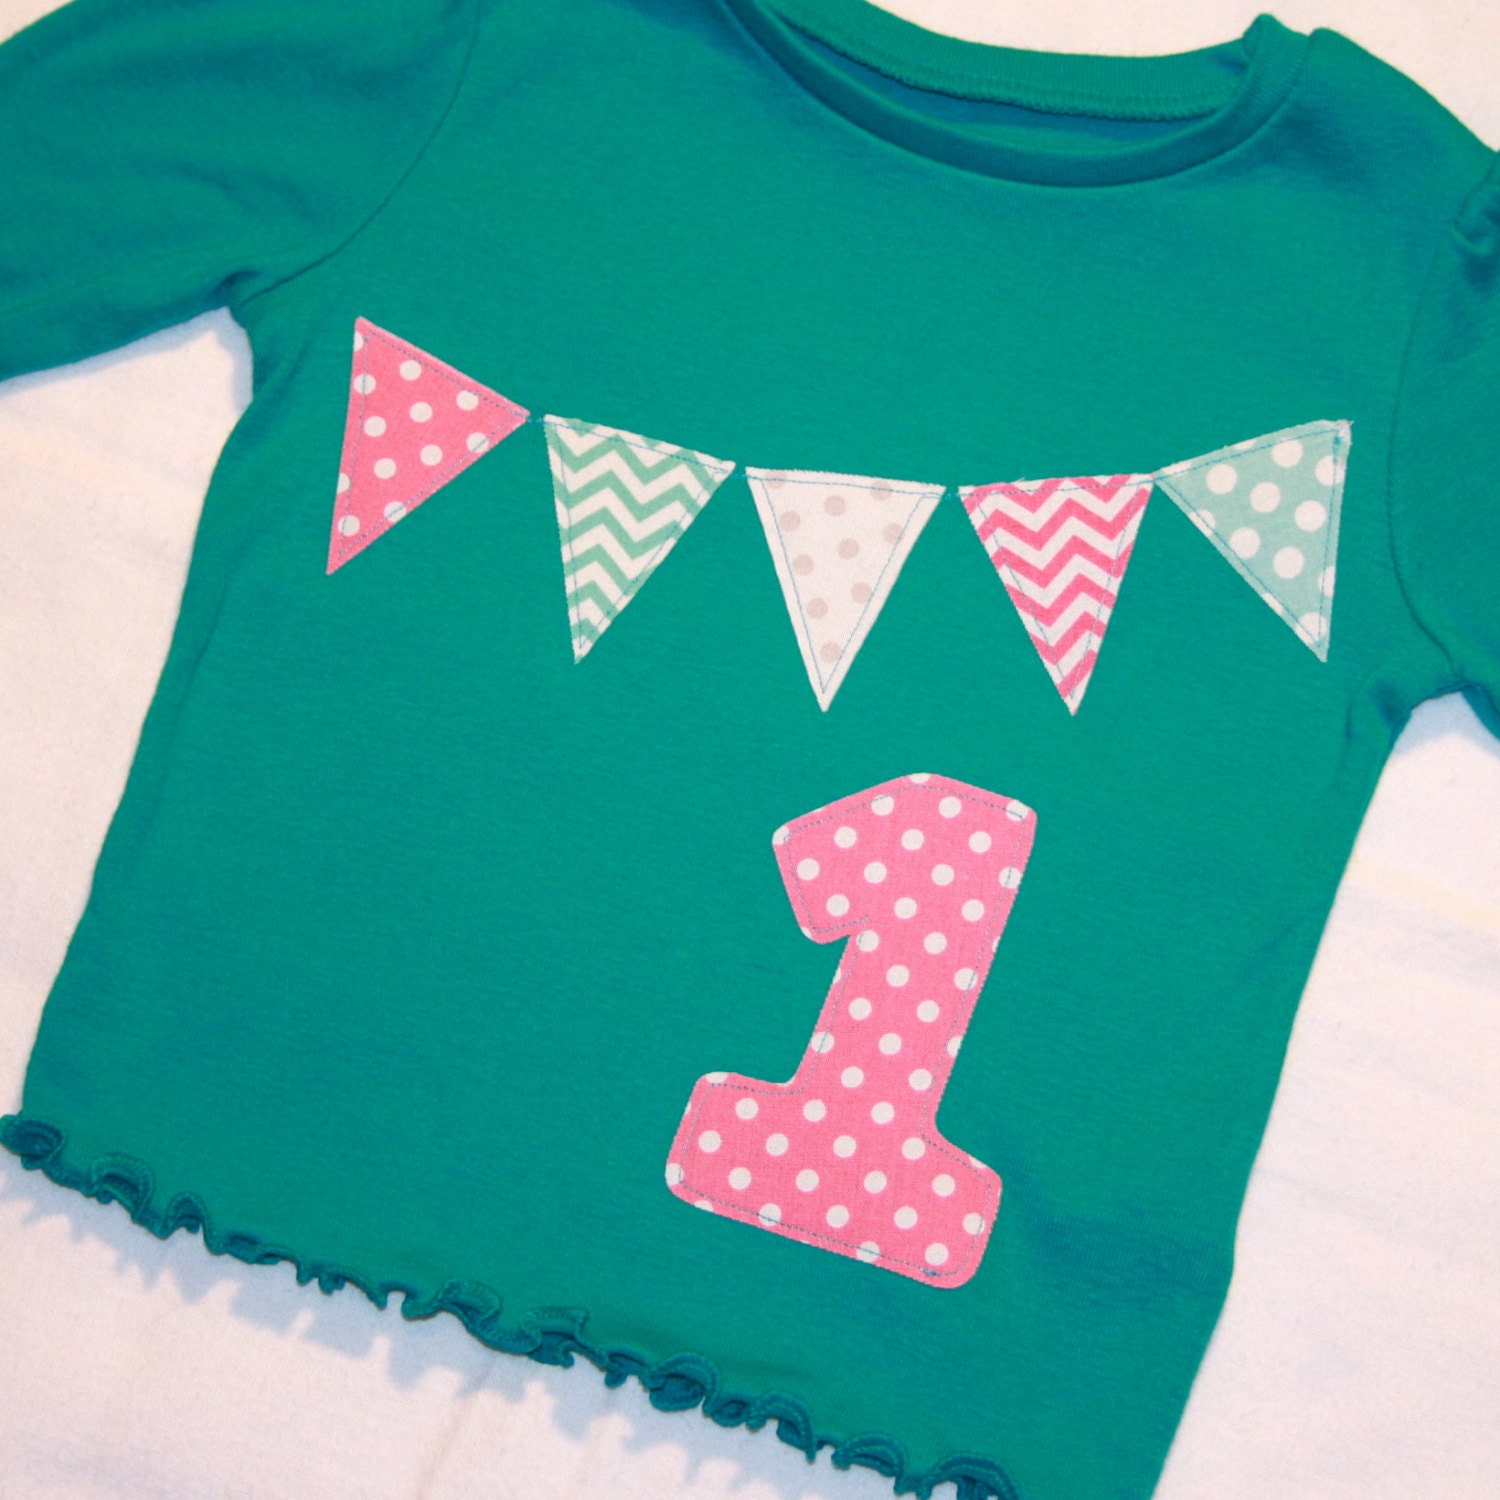 Girls 1st Birthday Pennant Shirt - Size 18 month aqua long sleeved with number 1 and pennant banner in pink and aqua - ThePolkaDotTotSpot